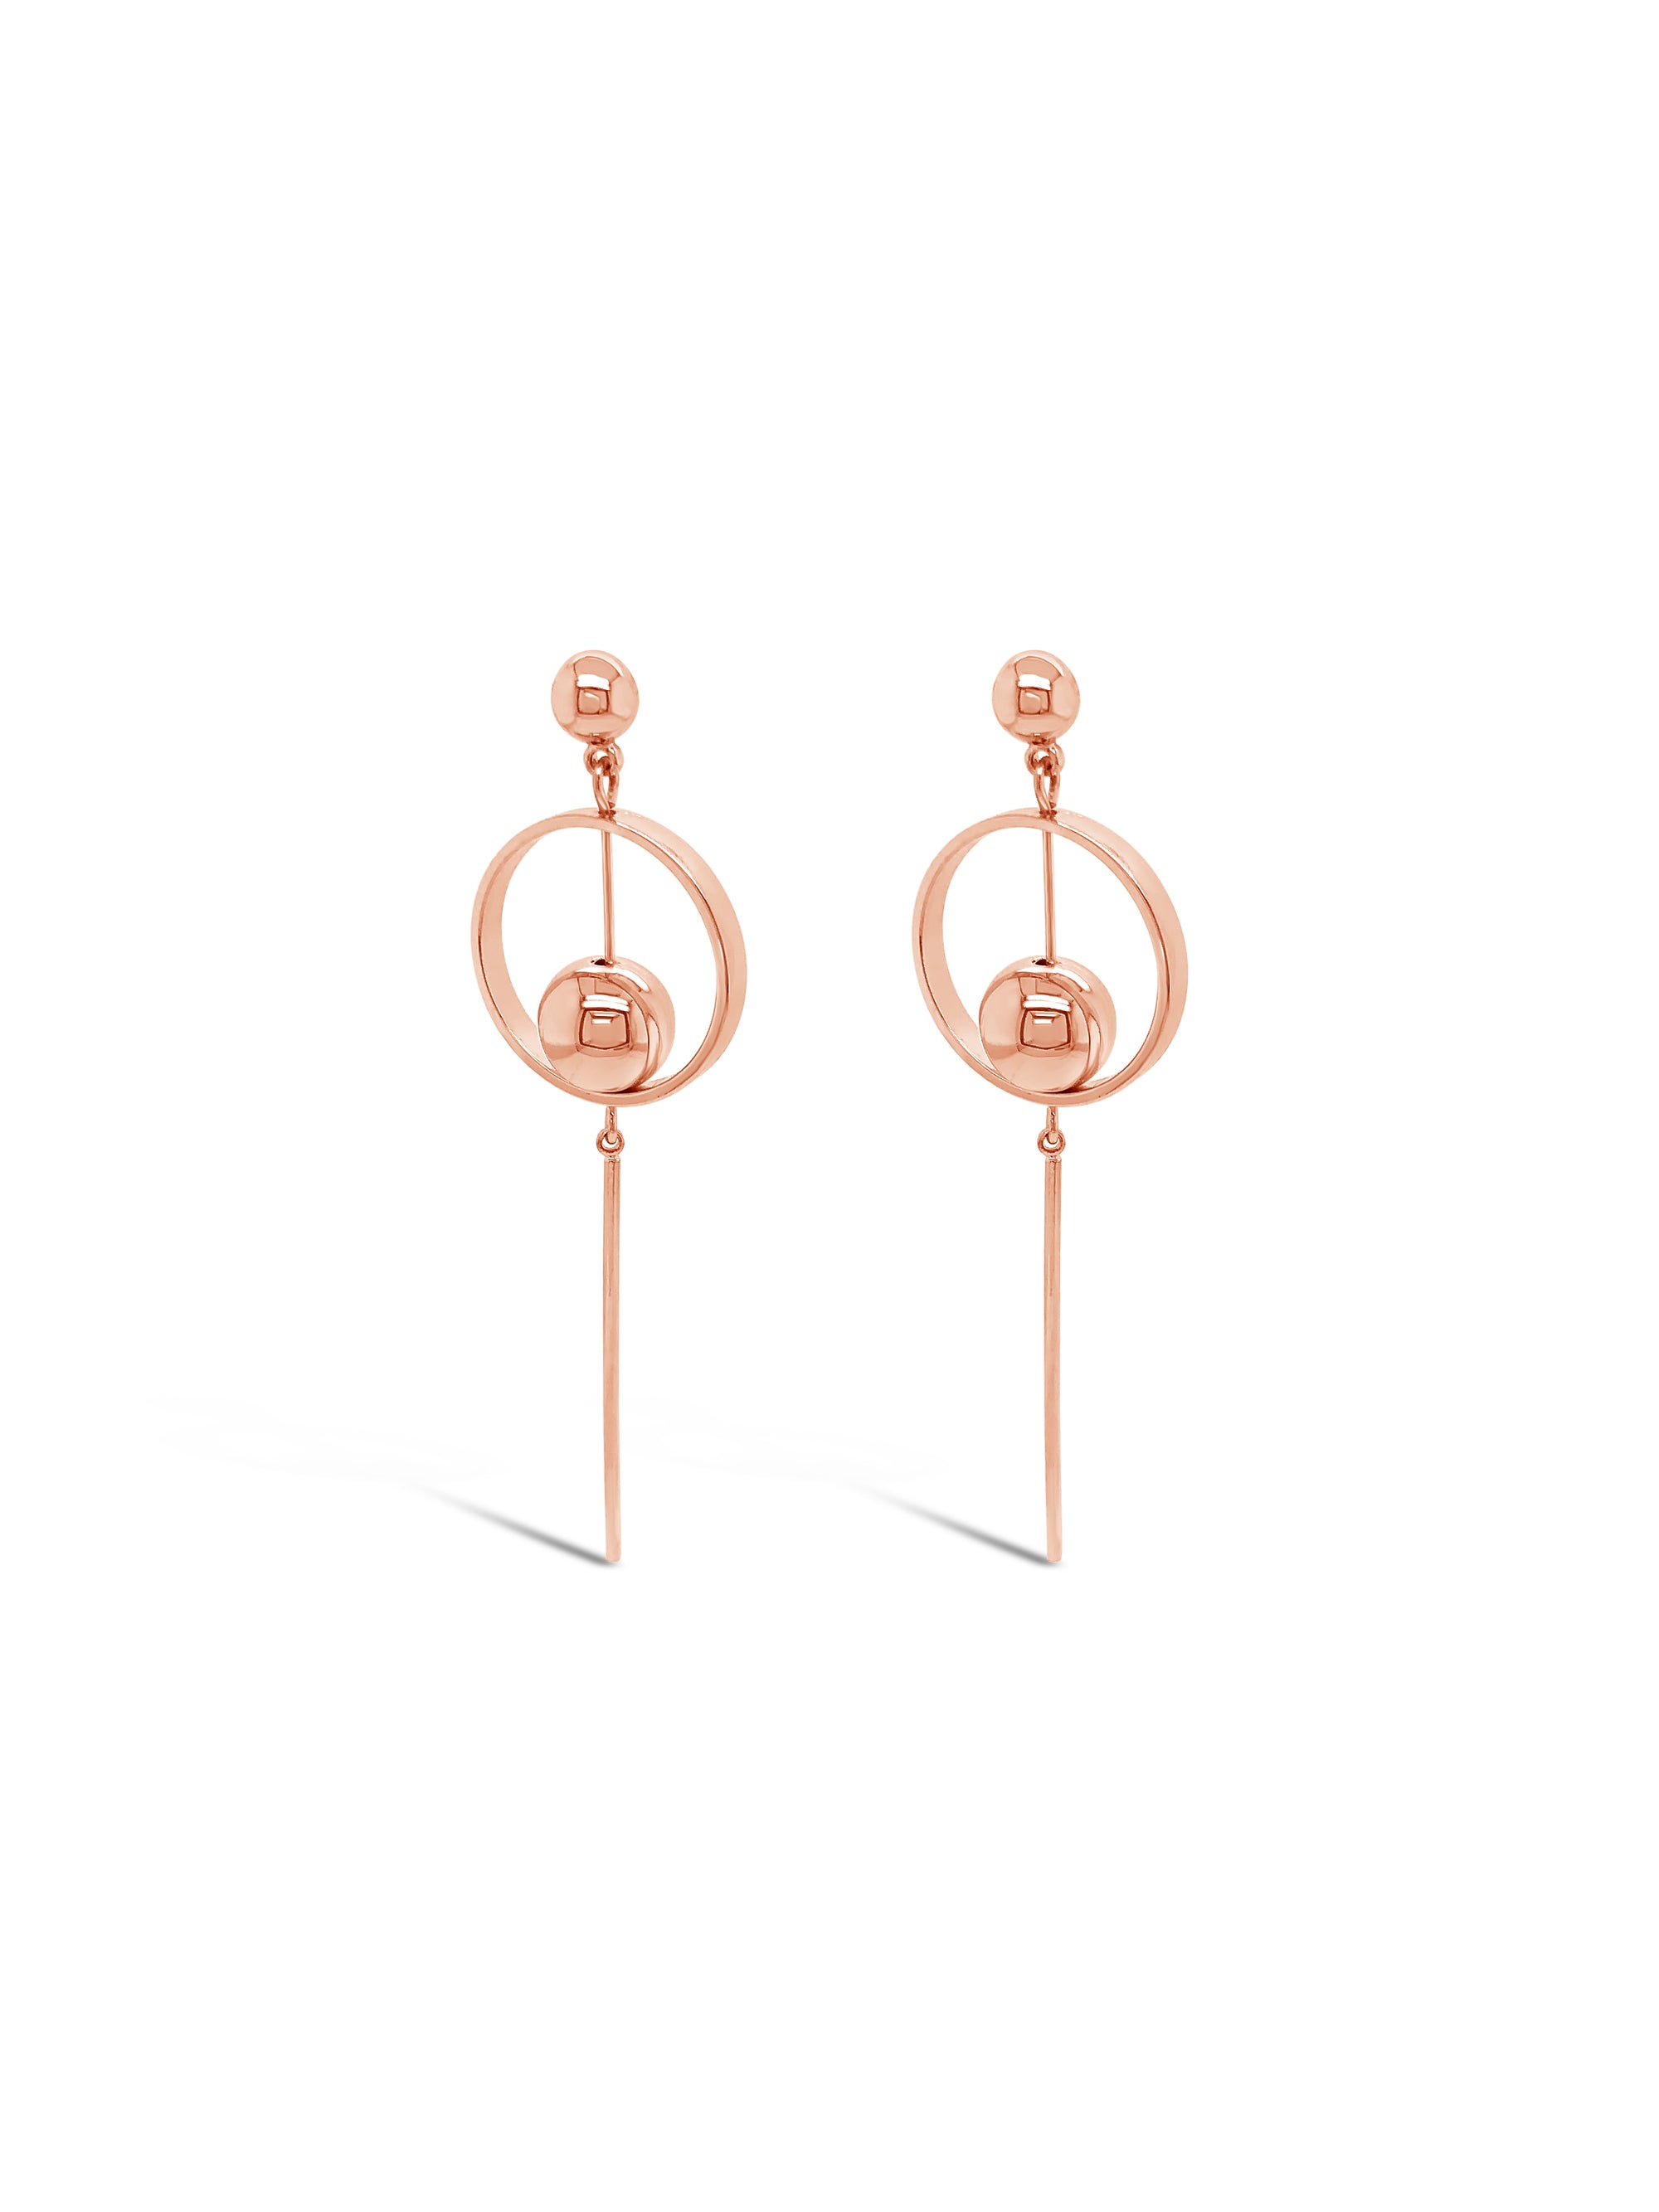 Absolute Jewellery Rose Gold Earring